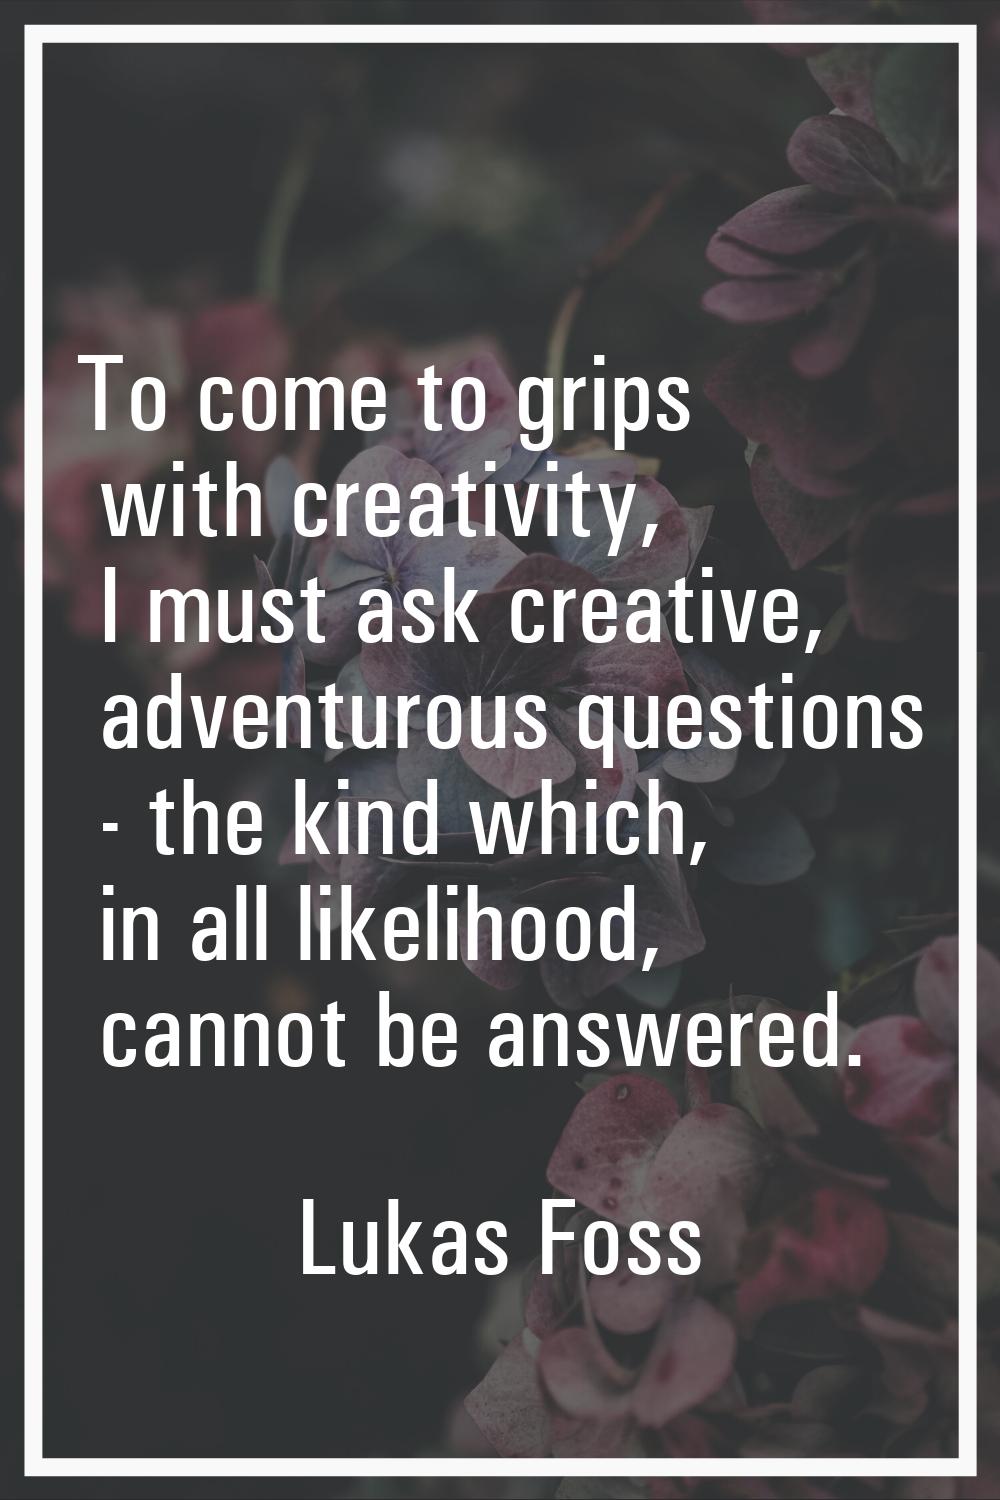 To come to grips with creativity, I must ask creative, adventurous questions - the kind which, in a